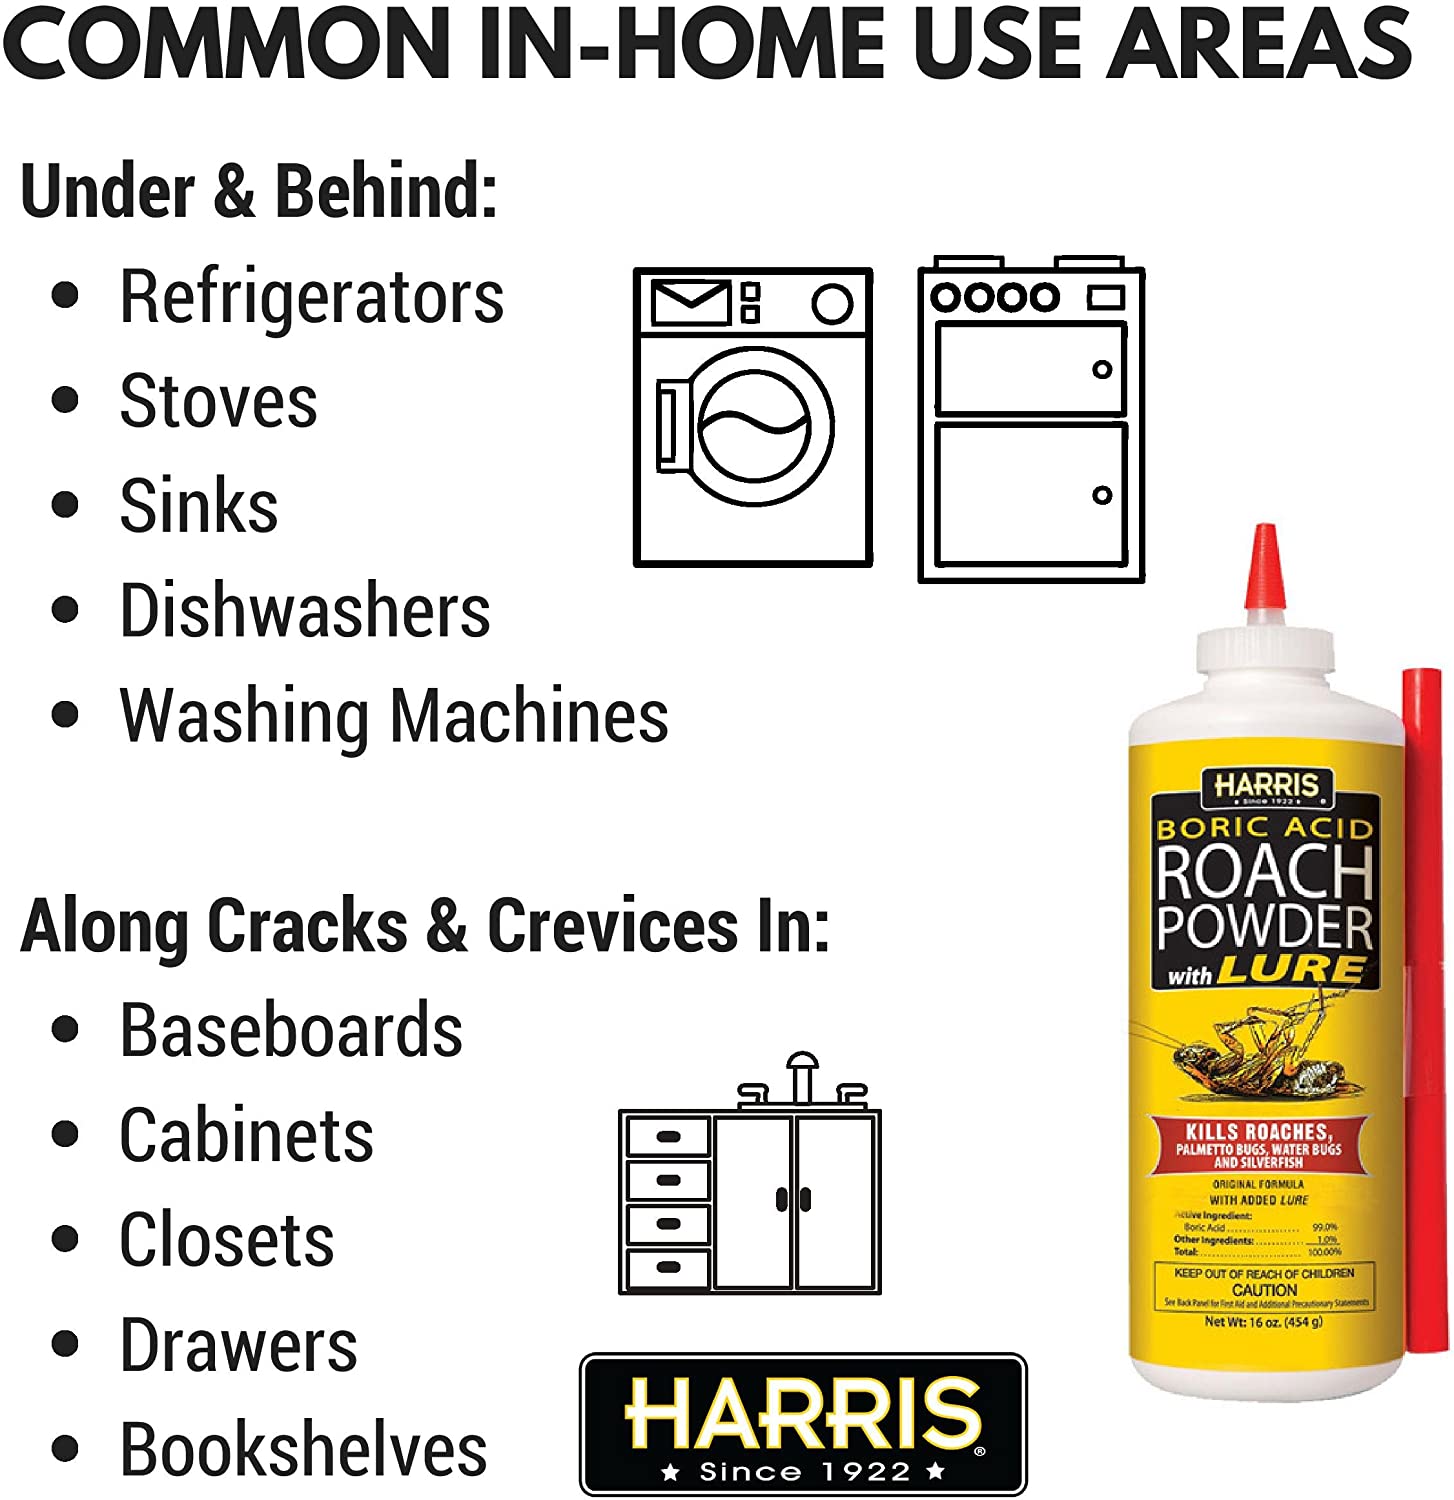 Harris Boric Acid Roach Power with lure kills Roaches, Palmetto Bugs, Waterbugs and Silverfish. Puffer bottle with included straw reaches into cracks and crevices where insects hide. Continues to kill roaches, palmetto bugs, water bugs and silverfish for weeks after application as long as it's kept dry. Insects coming into contact with the powder will die within 72 hours after initial contact.